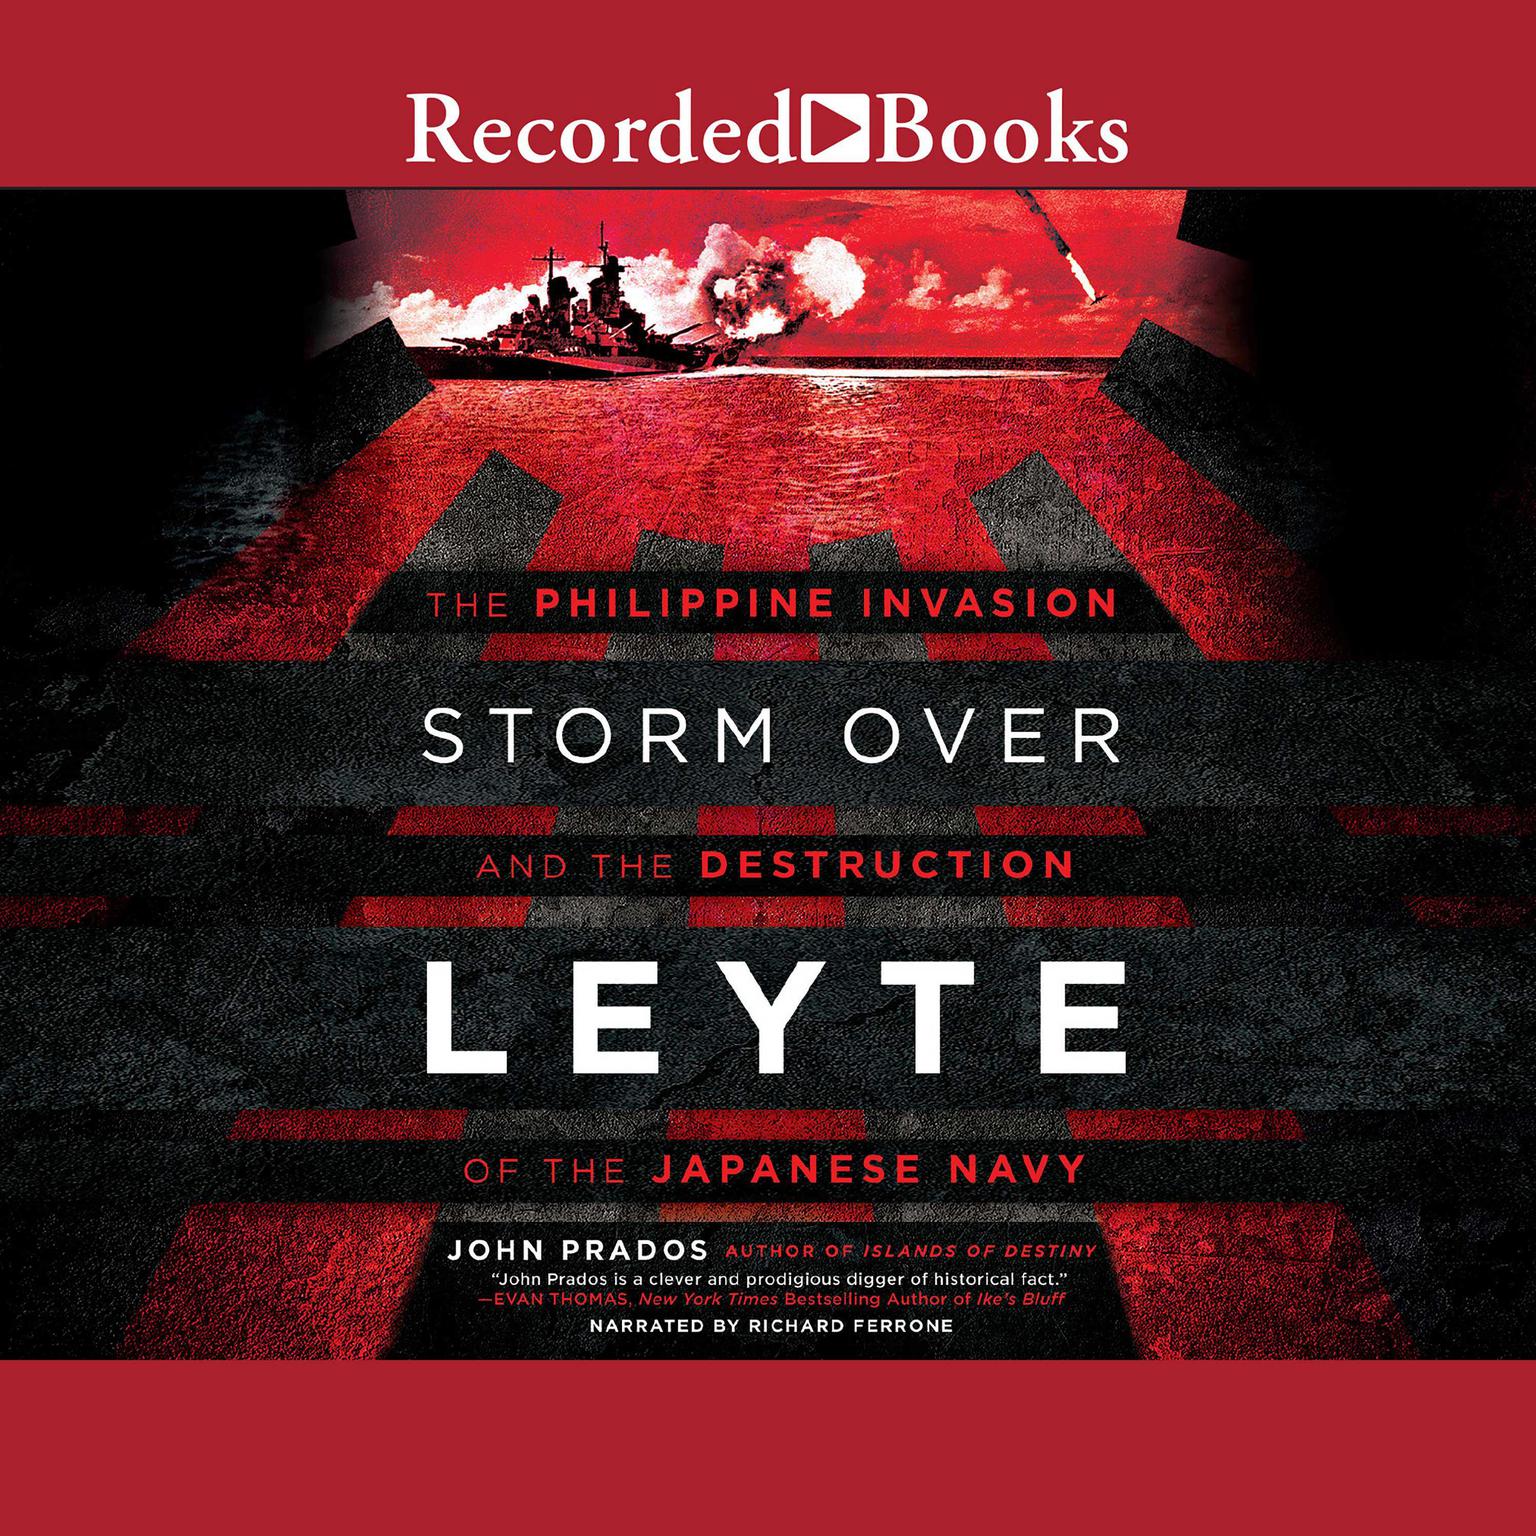 Storm Over Leyte: The Philippine Invasion and the Destruction of the Japanese Navy Audiobook, by John Prados